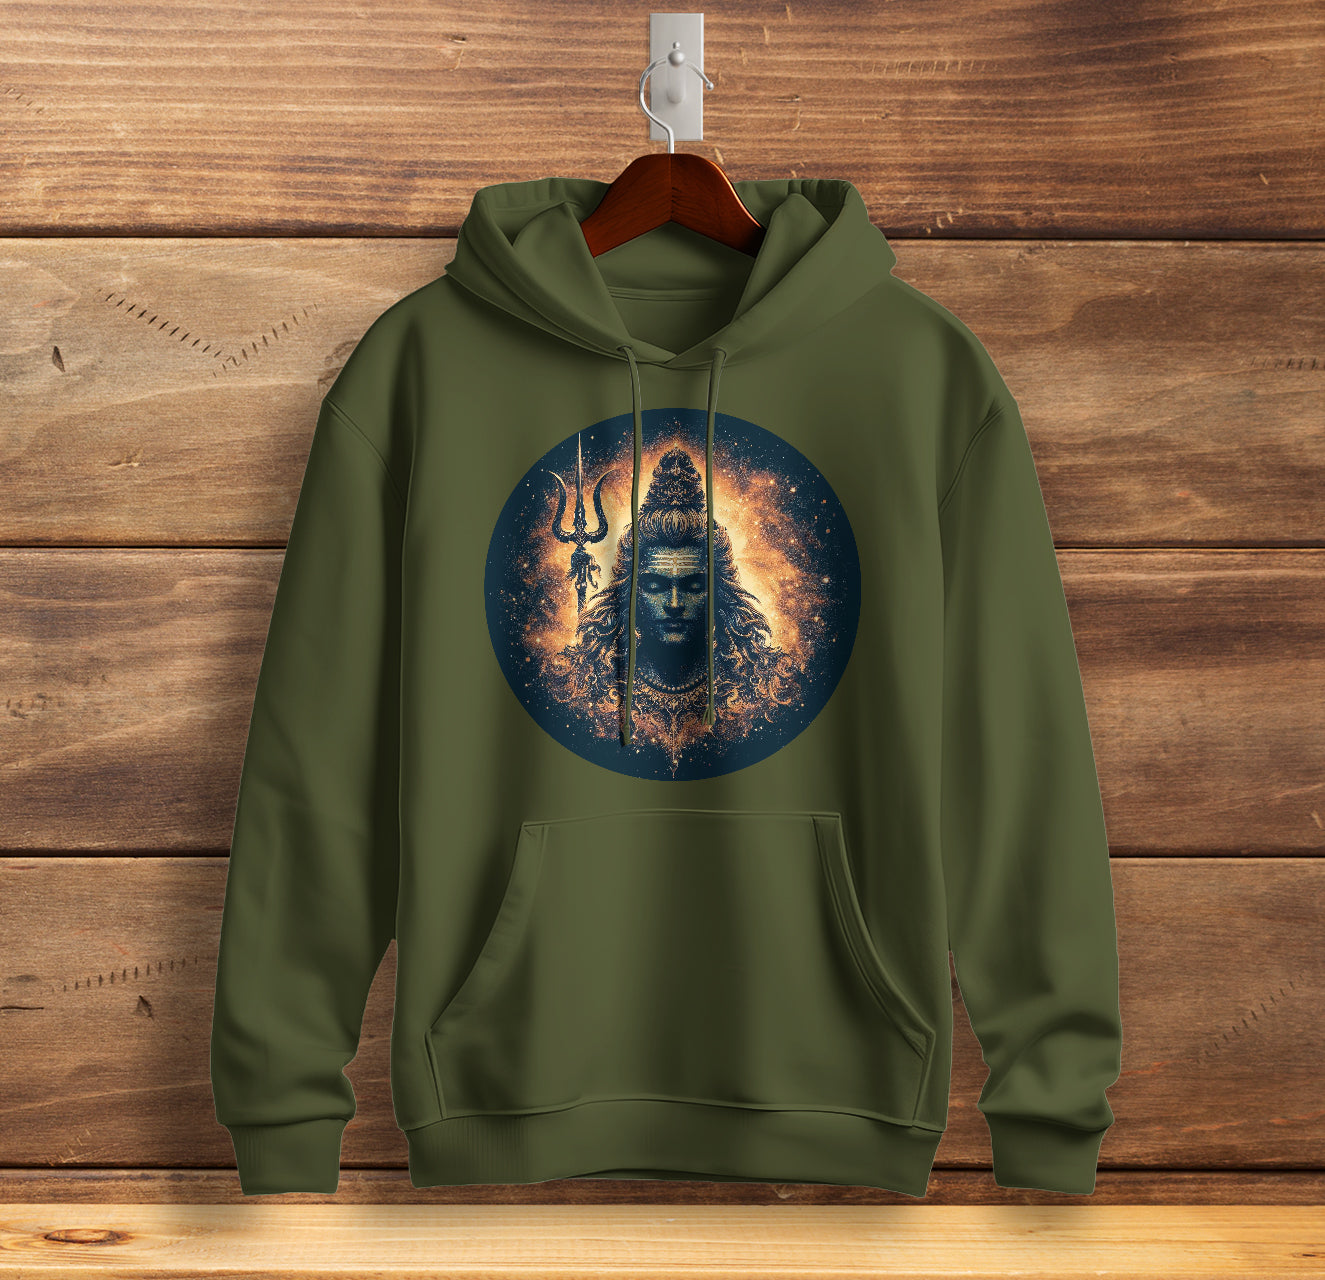 Blessings of Bholenath Graphic Printed Cotton Sweatshirt for Men Trinity Collection 🔱🔱🔱